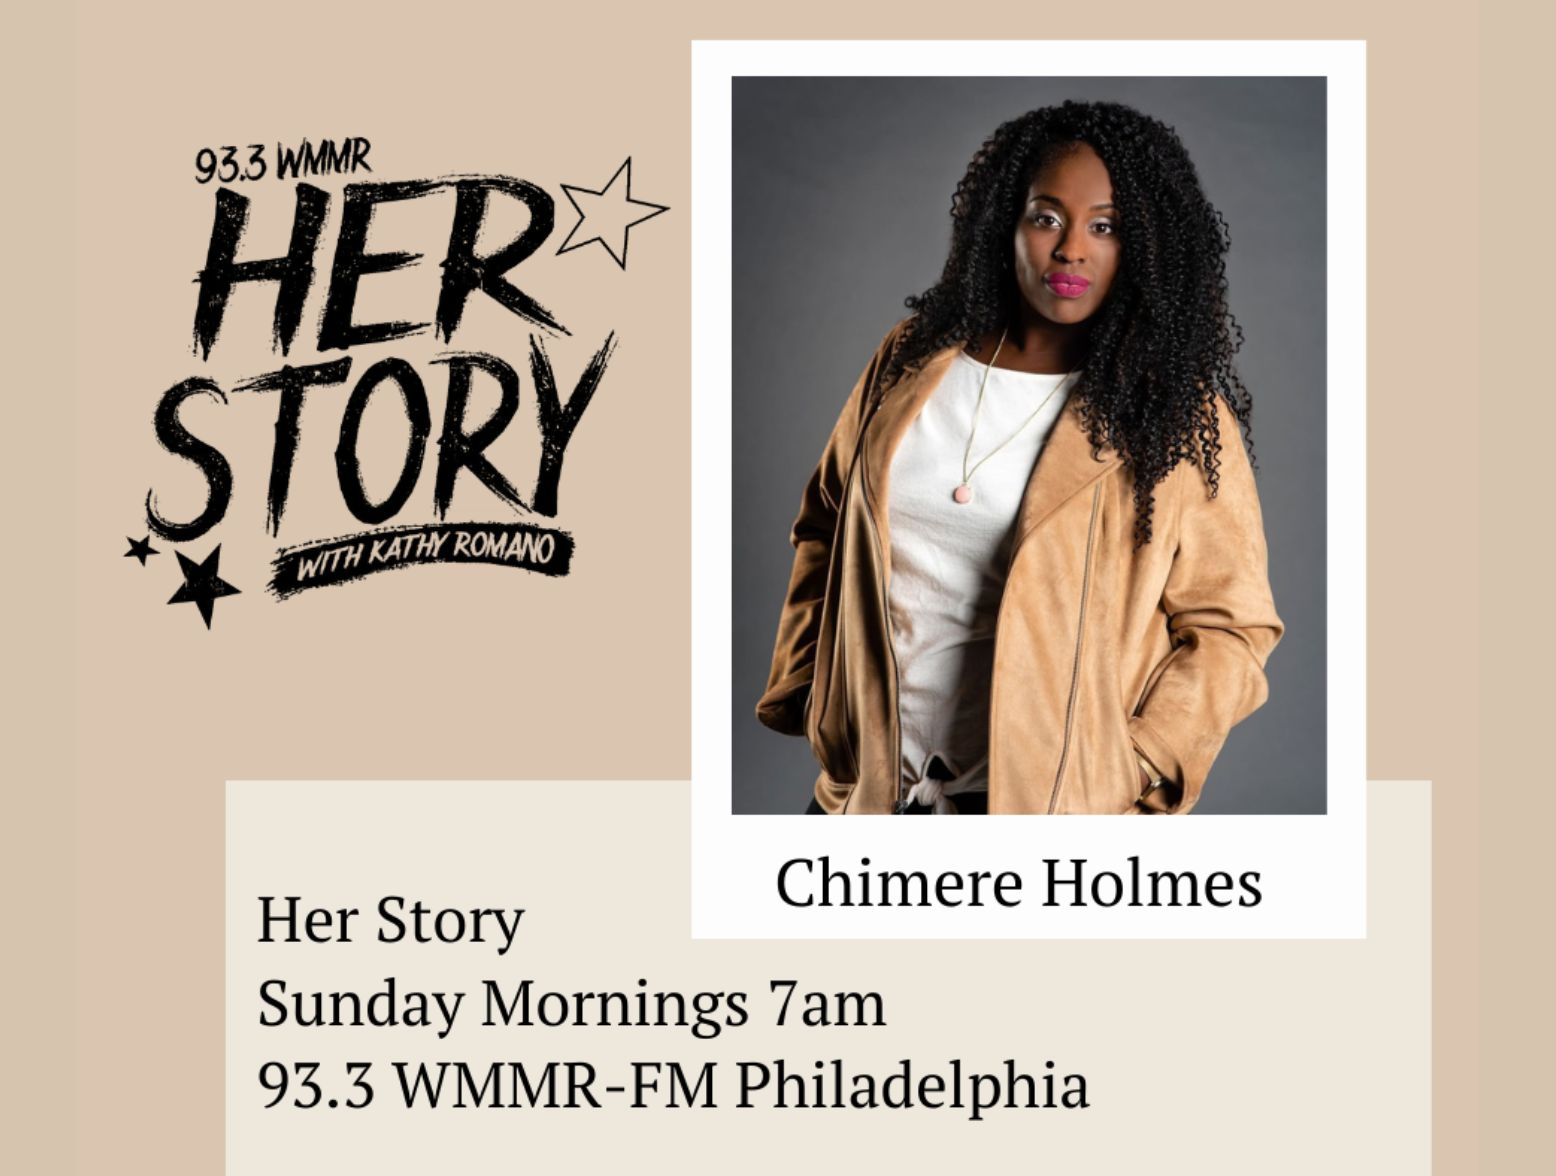 Chimère Holmes her story